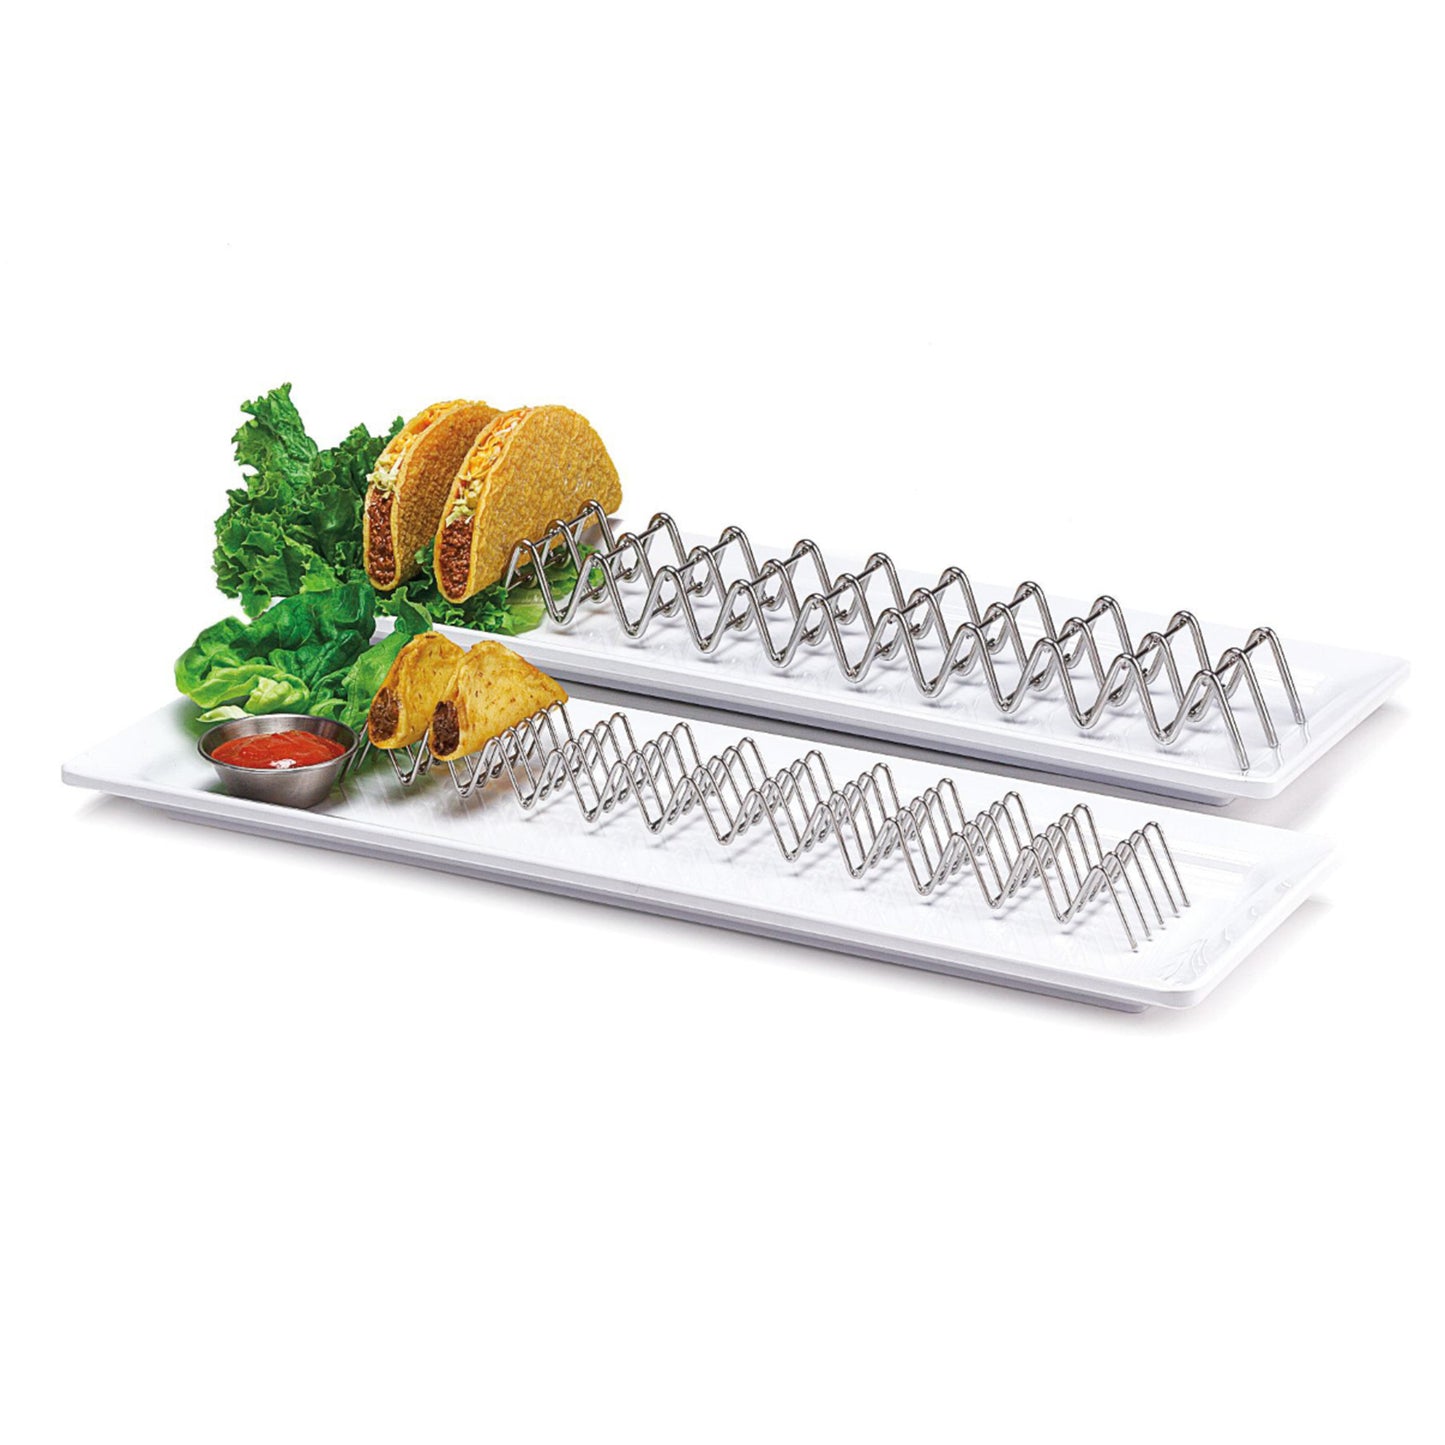 18.5" x 2.5" Holder for 11 or 12 Tacos, 1.5" Tall